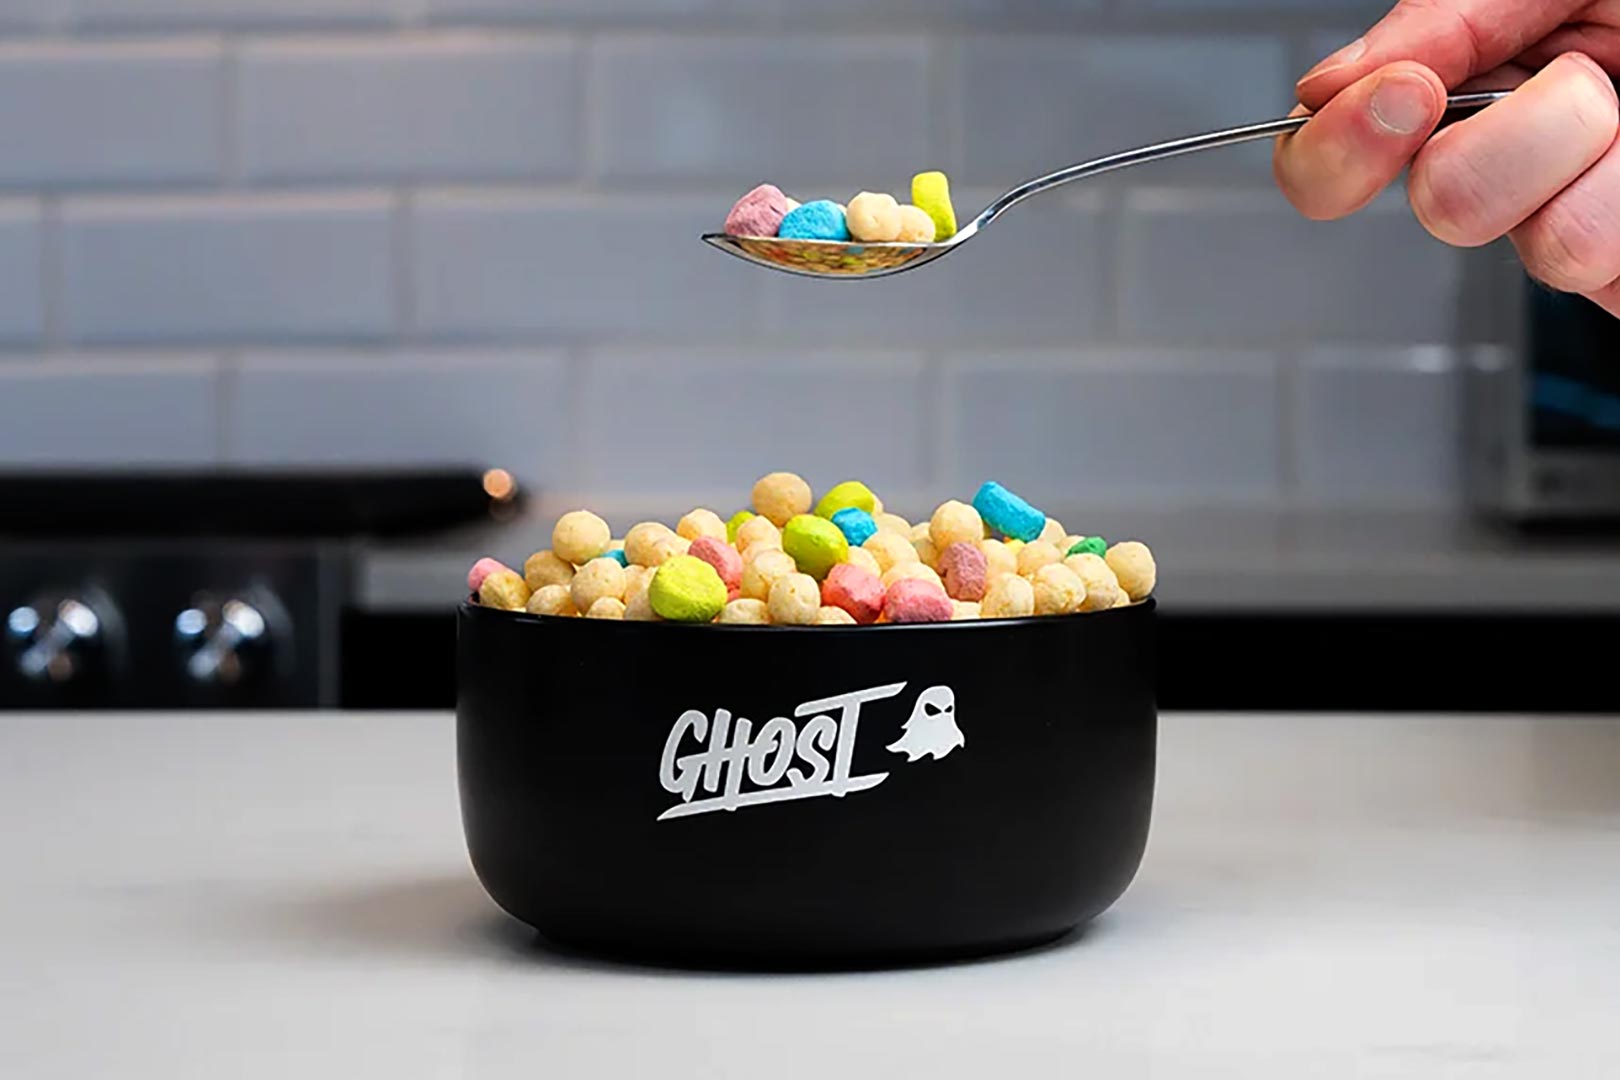 Ghost Protein Cereal Sold Out